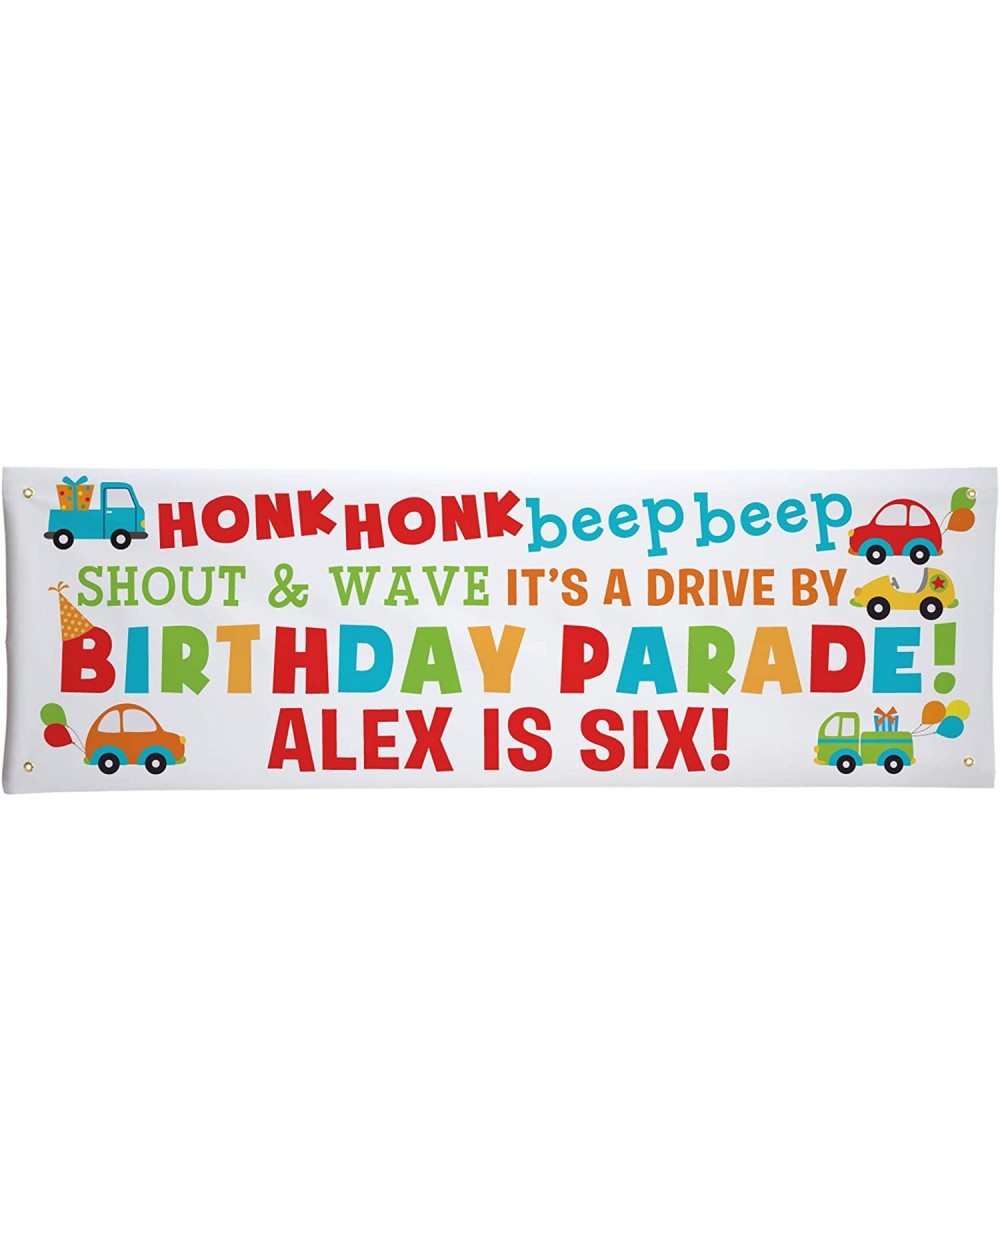 Banners & Garlands Personalized Birthday Banner - Honk Honk Birthday Banner - Customize with Name - Birthday Party Banner - L...